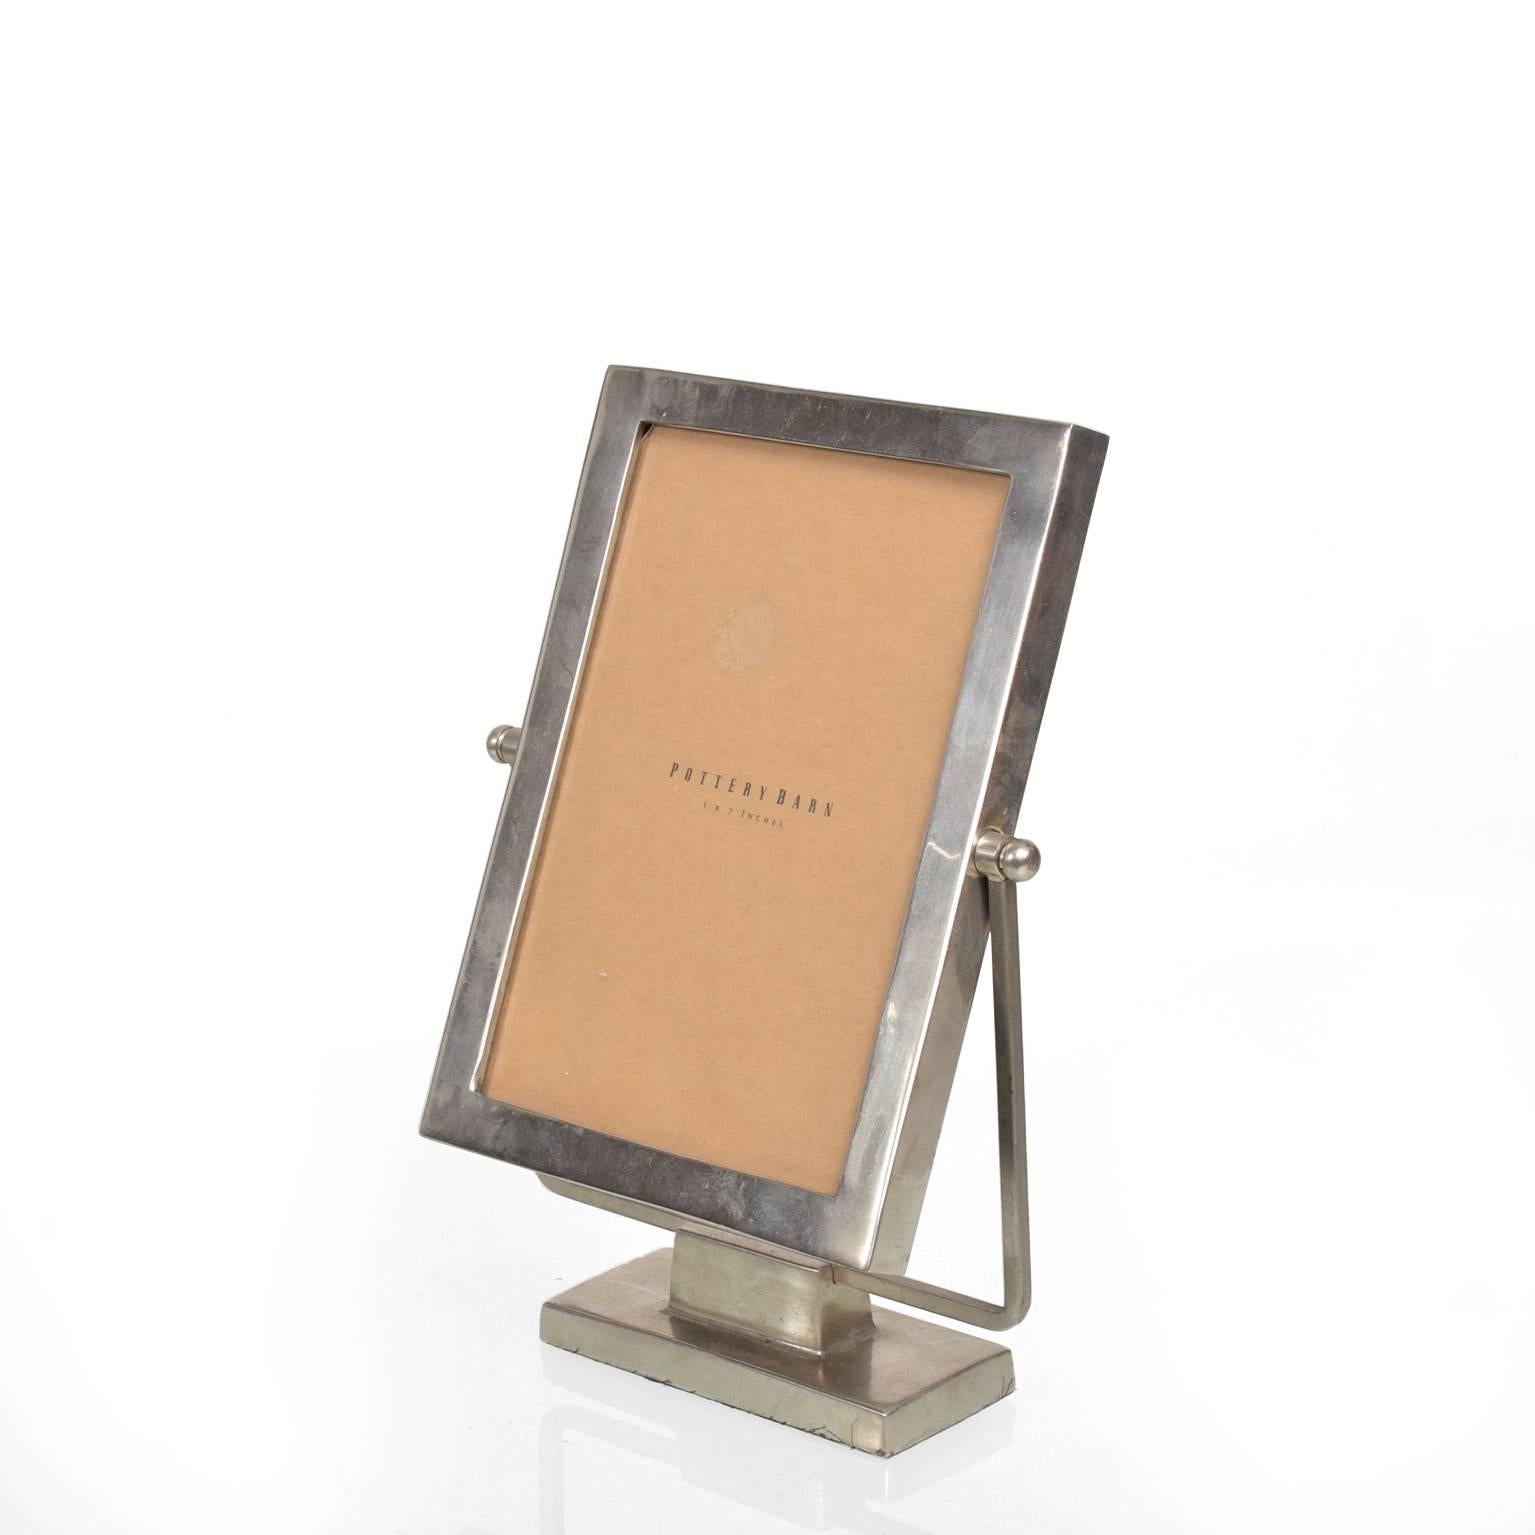 For your consideration a nice pewter picture frame on base measure: 5